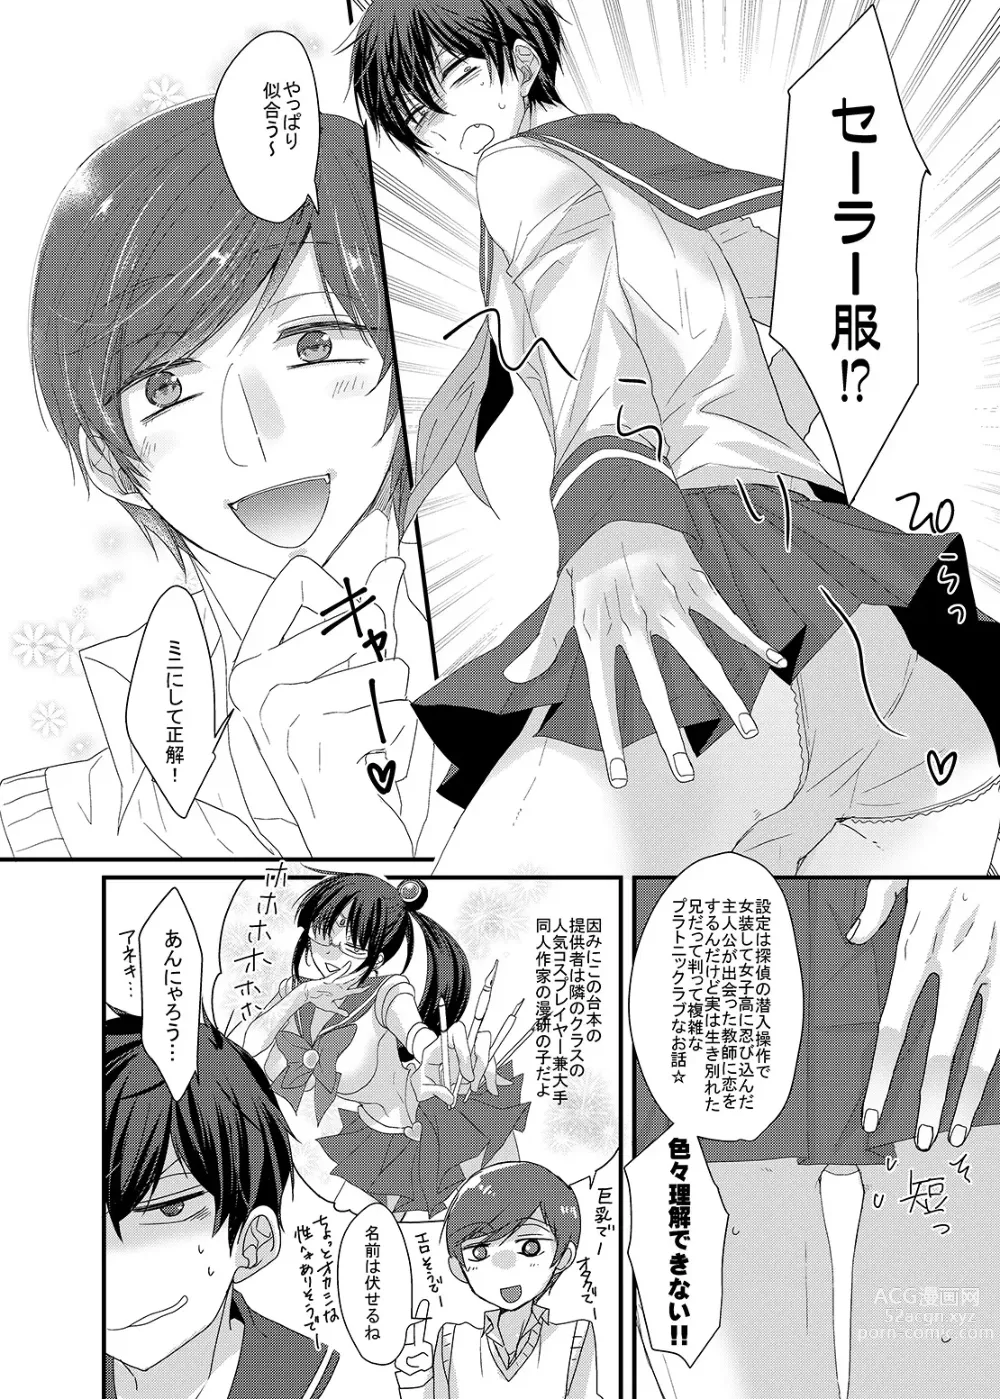 Page 7 of doujinshi 帰宅部一松、演劇部のノリについていけない!!